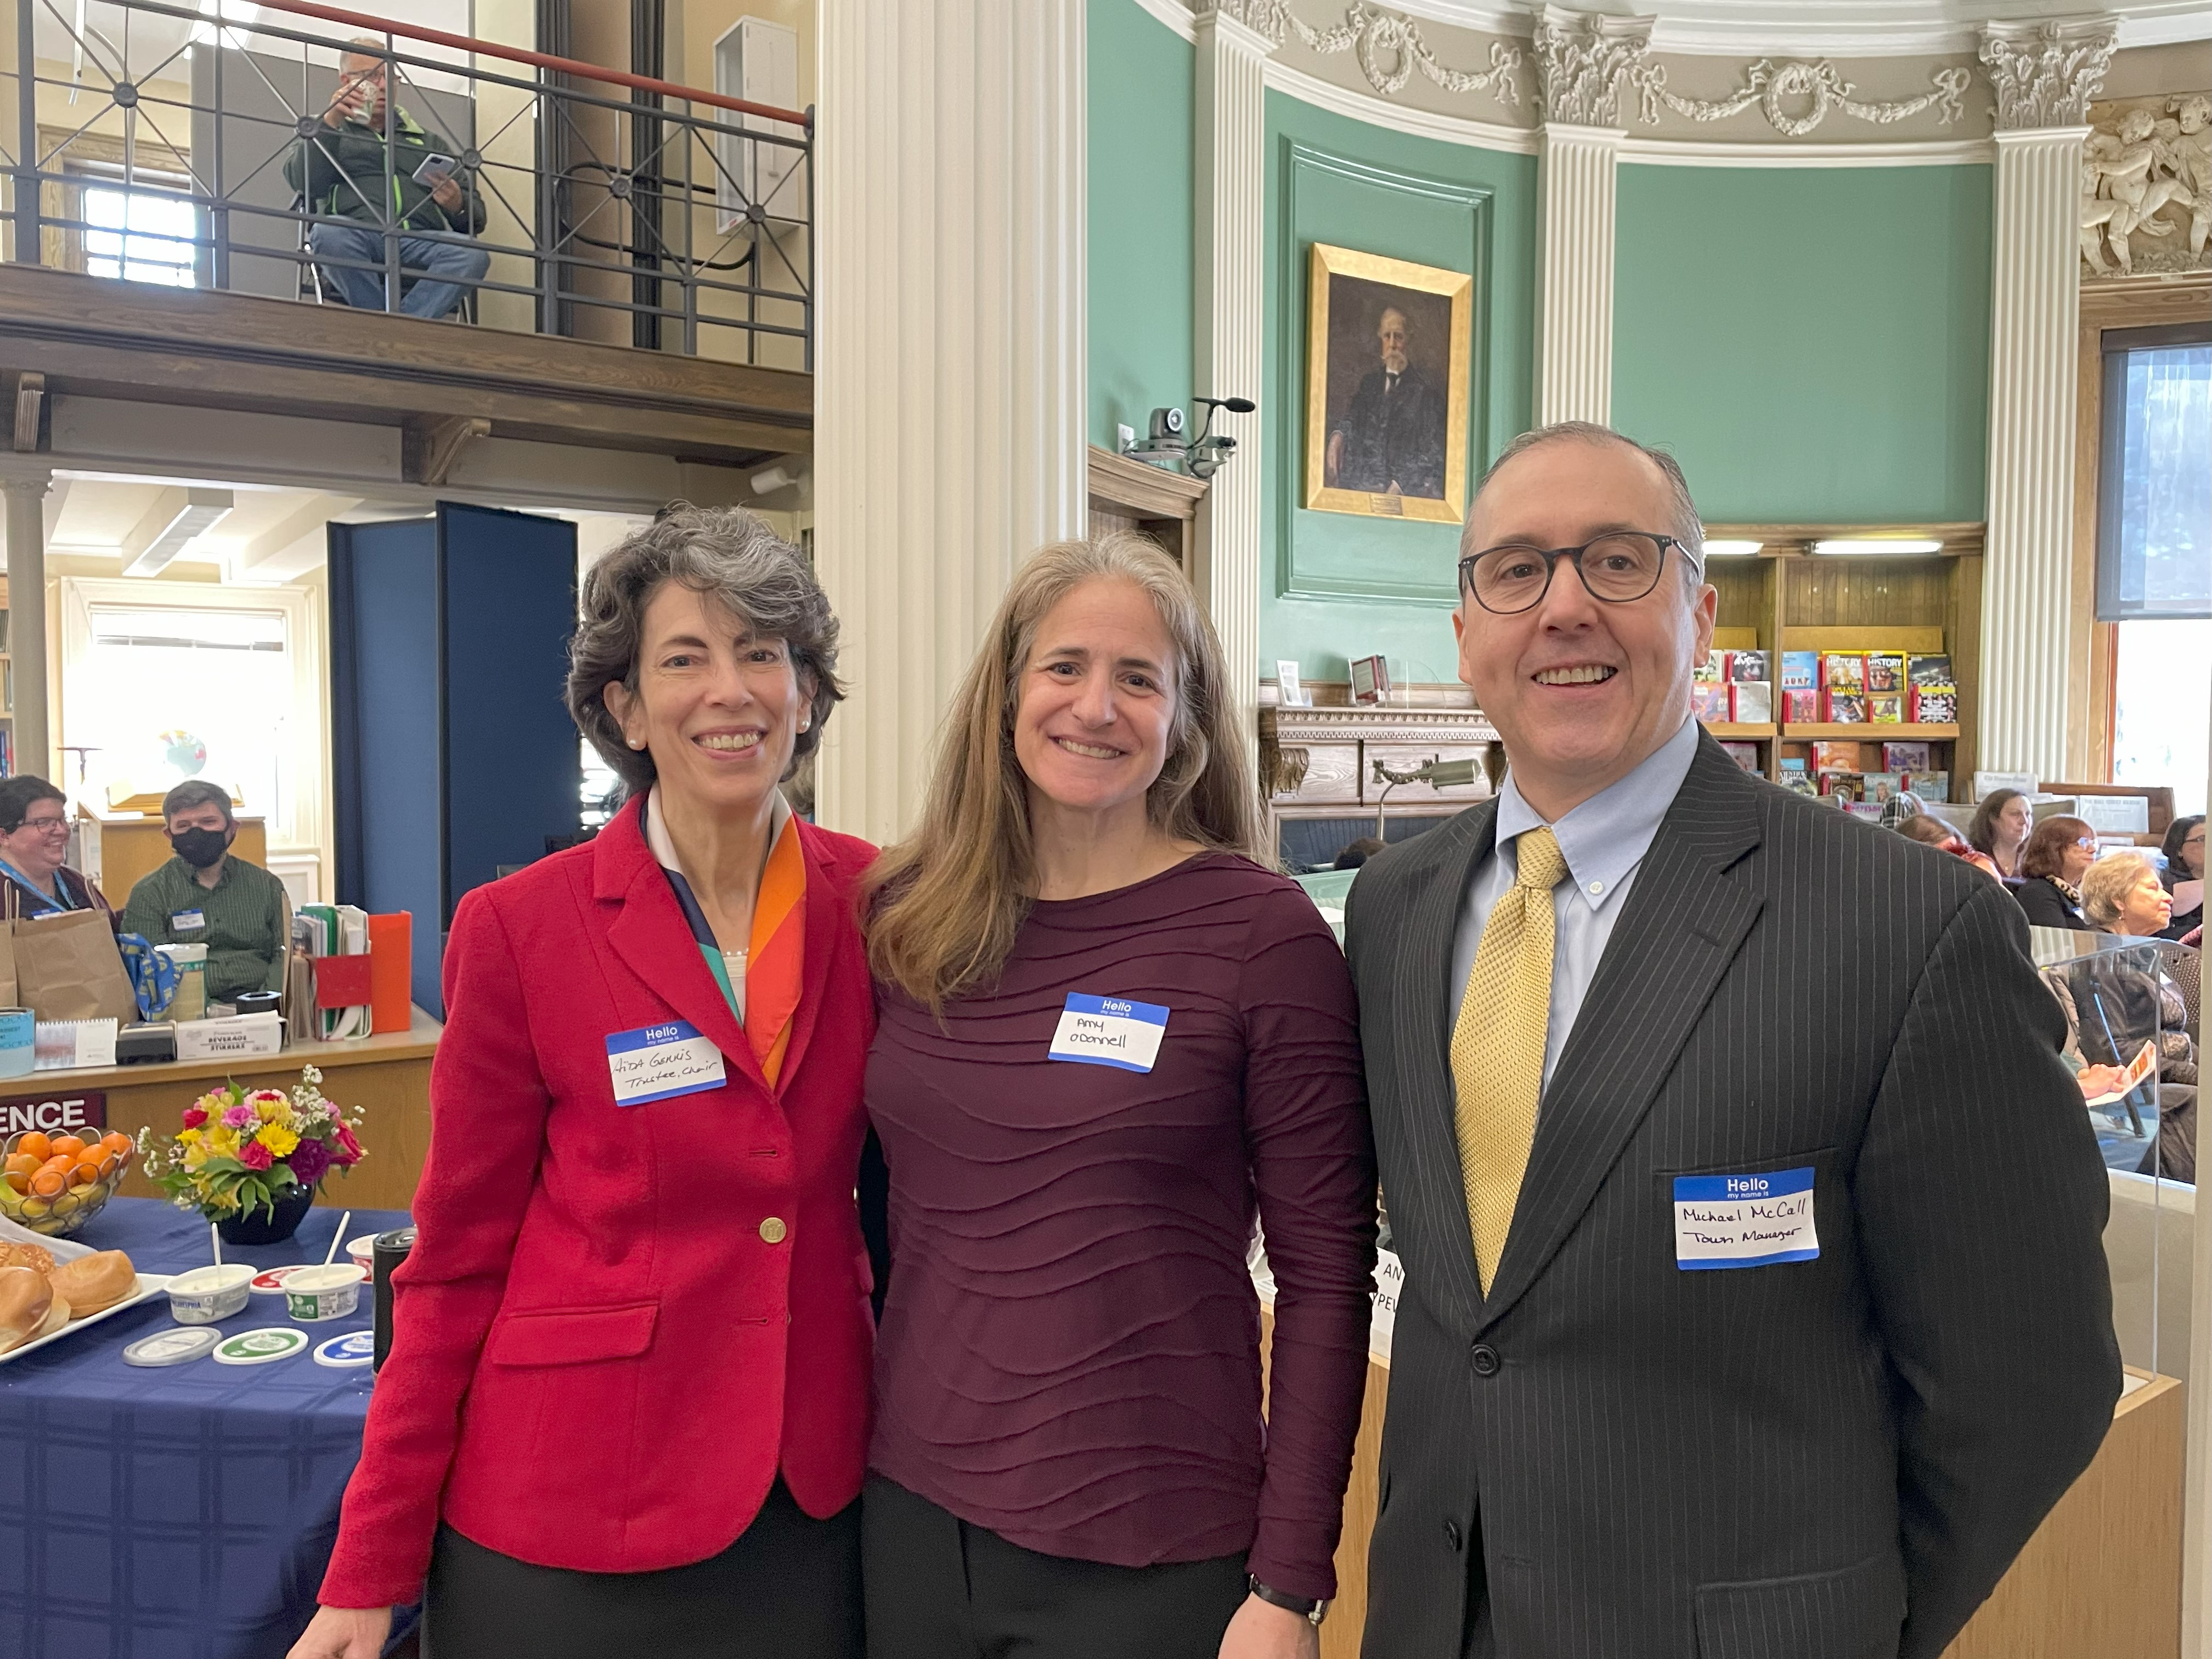 L to R: Aida Gennis, Chair, Wayland Board of Library Trustees, Amy O’Donnell, Wayland Resident, and Michael McCall, Wayland Town Manager.